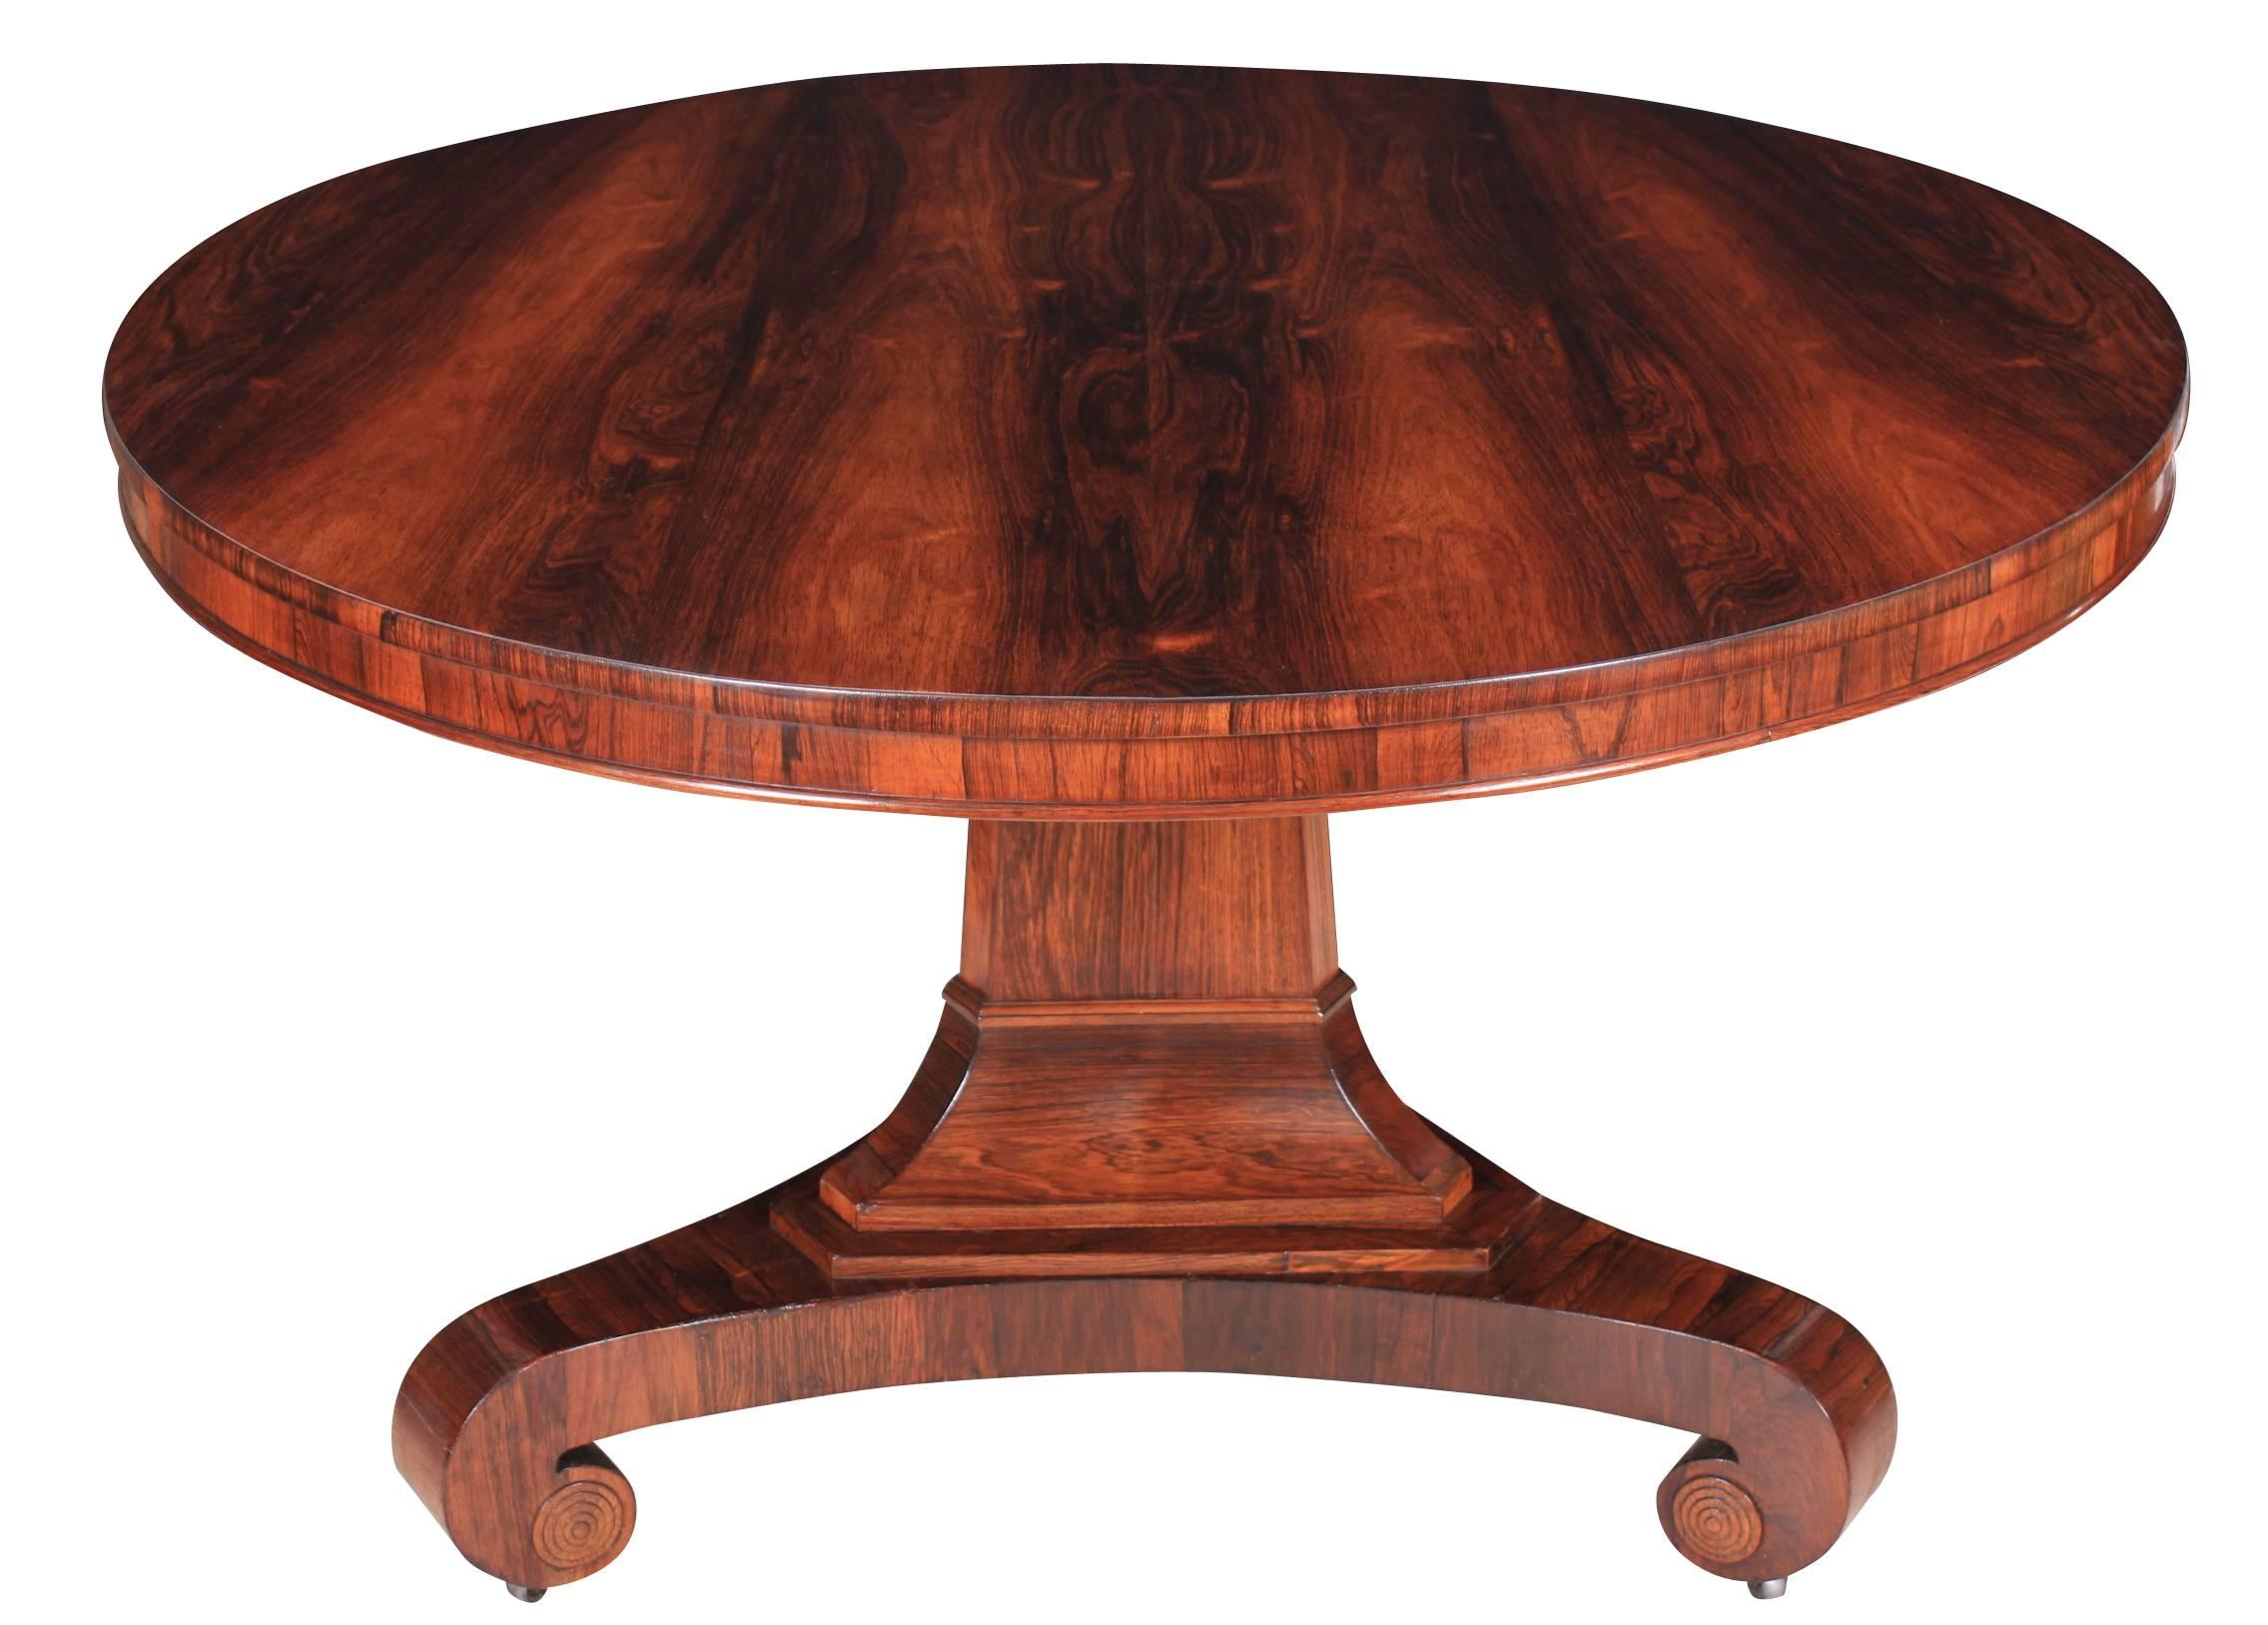 Early 19th Century Round Circular Rosewood Breakfast Dining Table